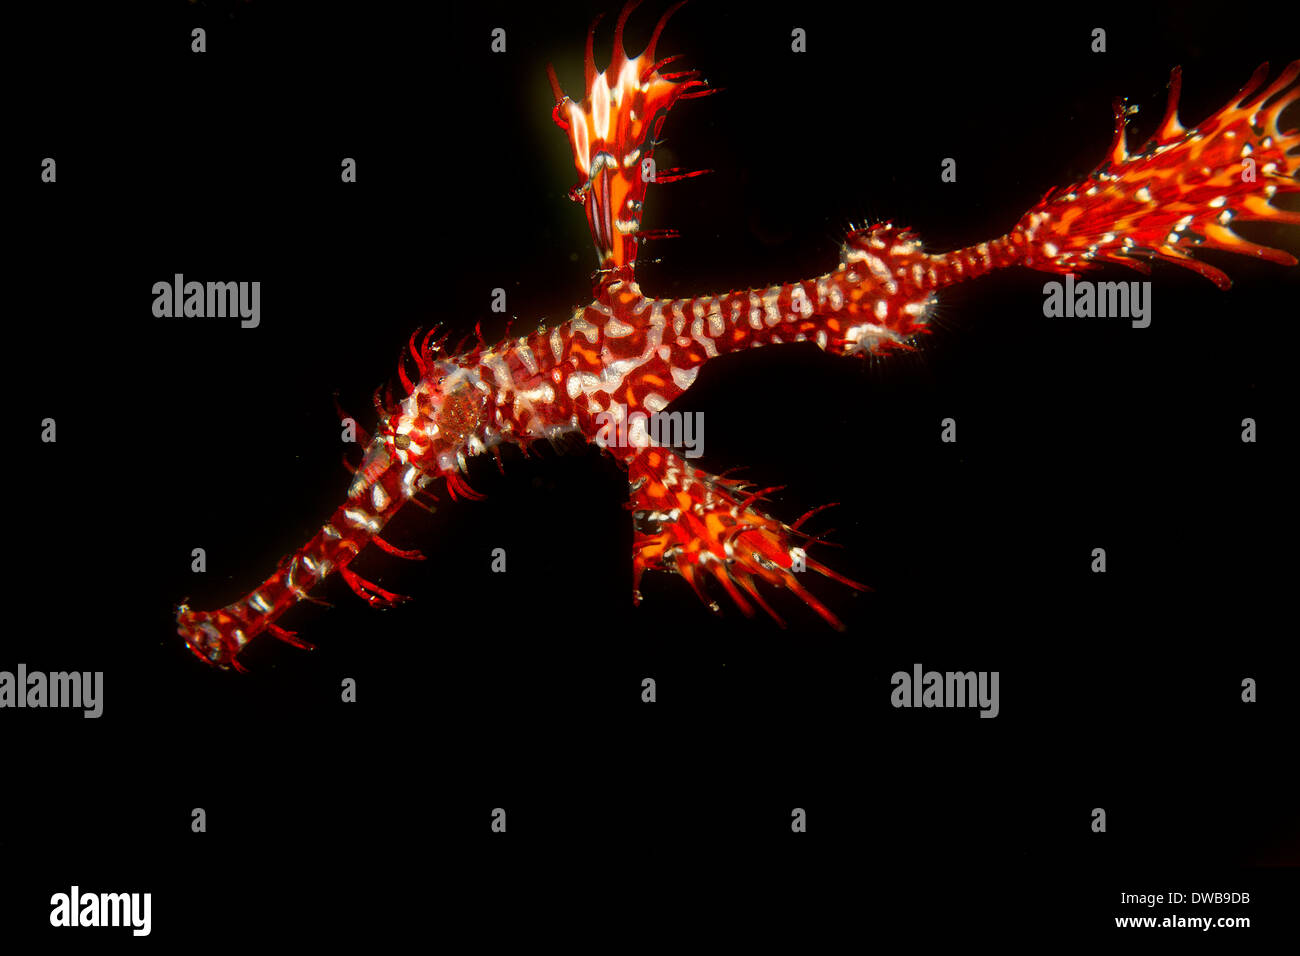 Ornate ghost pipefish midwater. Stock Photo